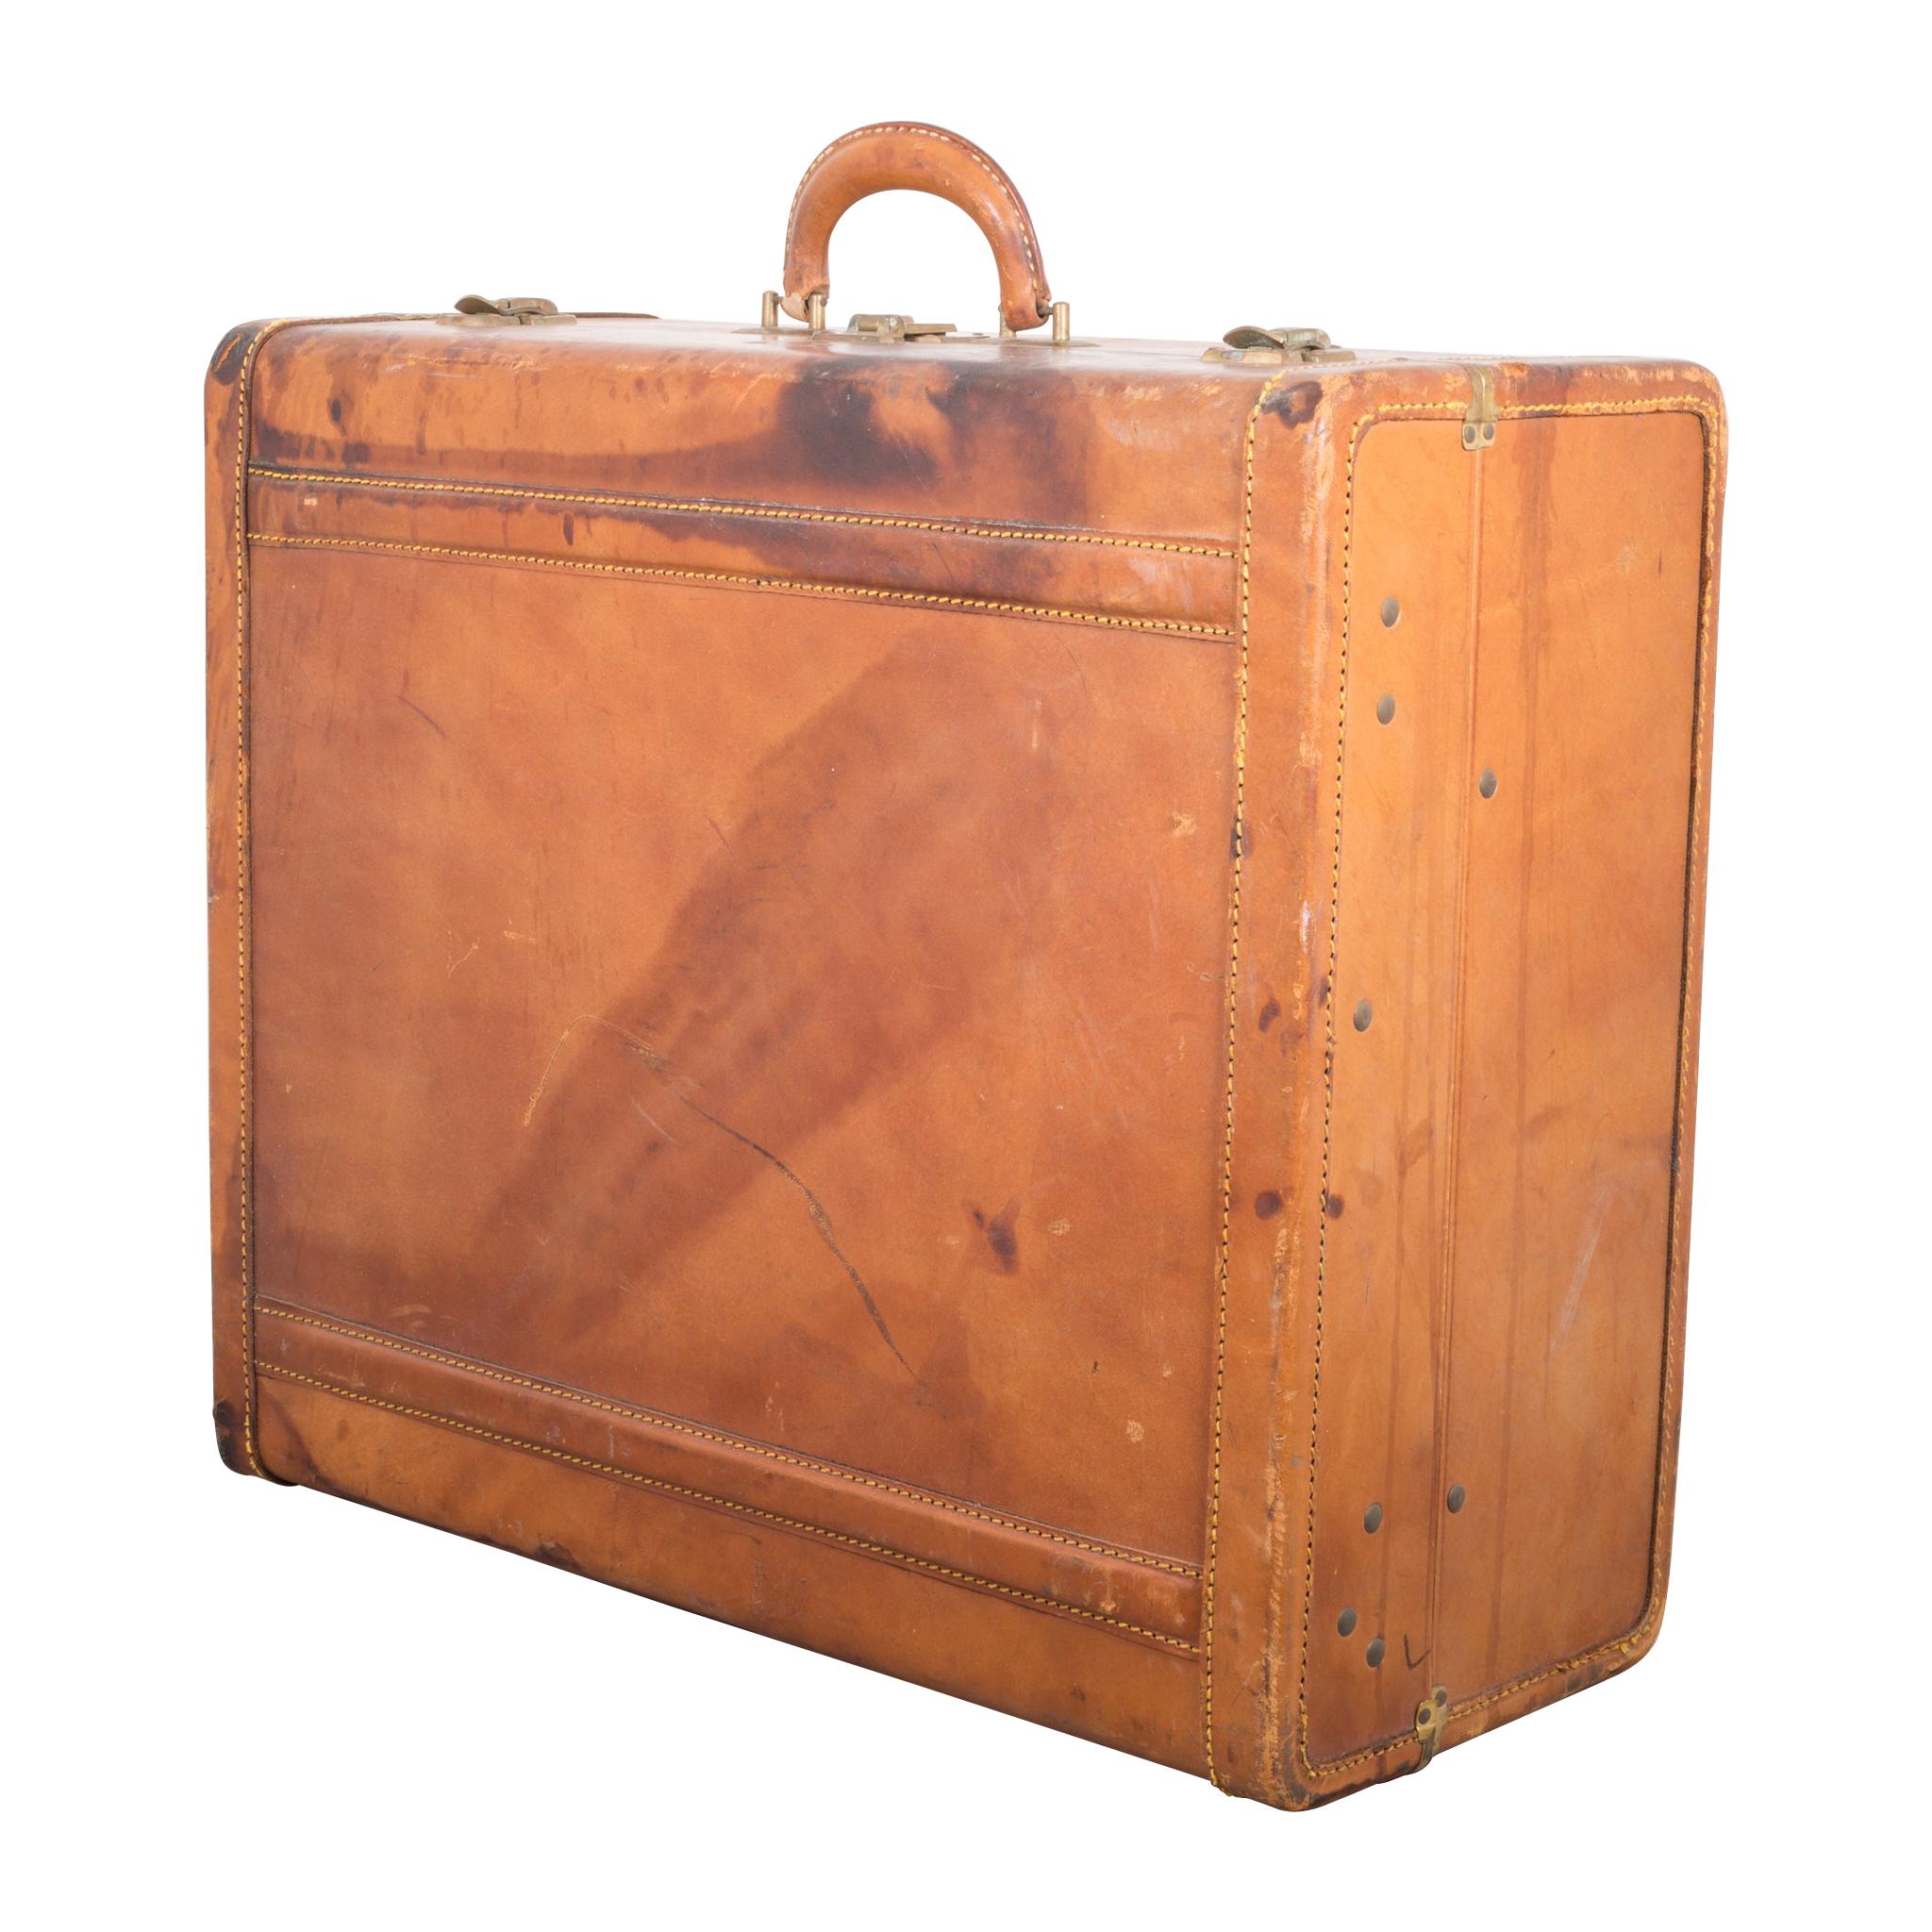 Monogrammed Leather and Brass Suitcase, circa 1940